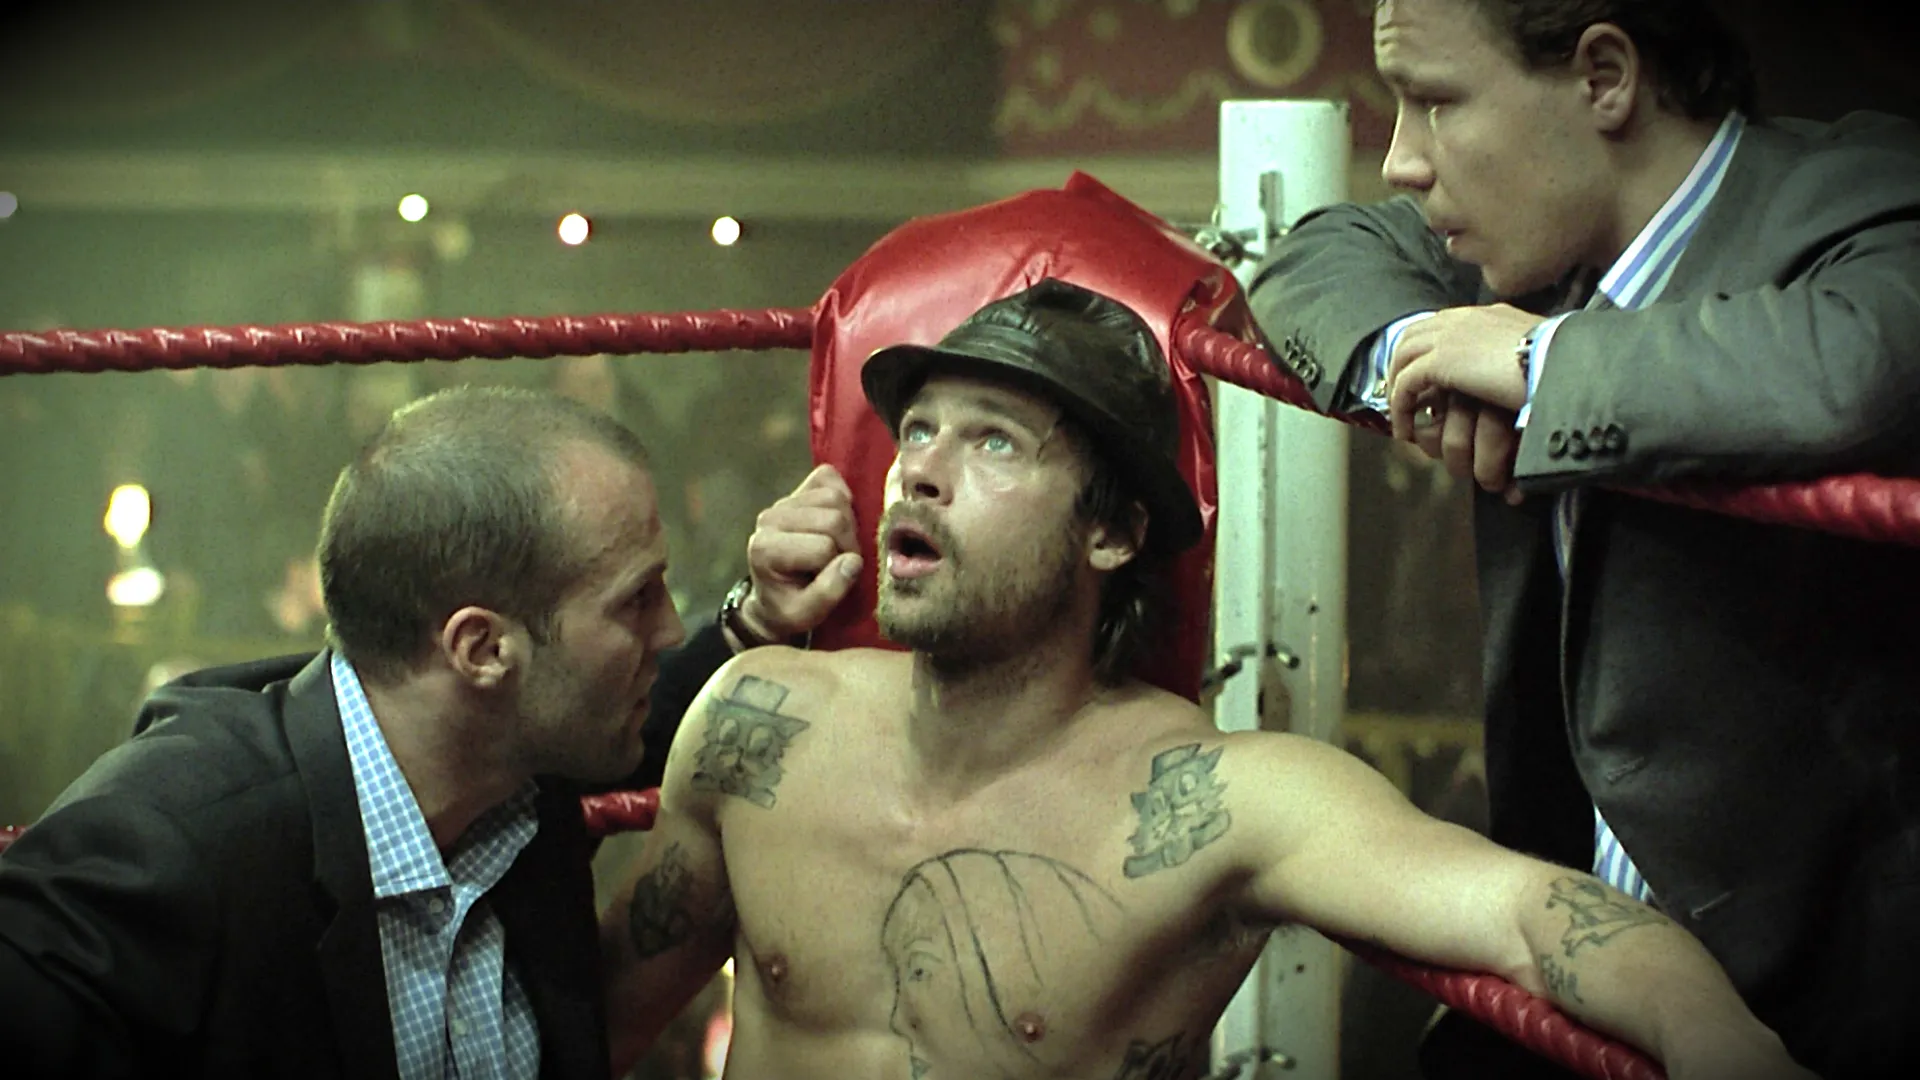 https://cinematicpaintings.com/post/164349362808/snatch-2000 Source: Cinematic Paintings